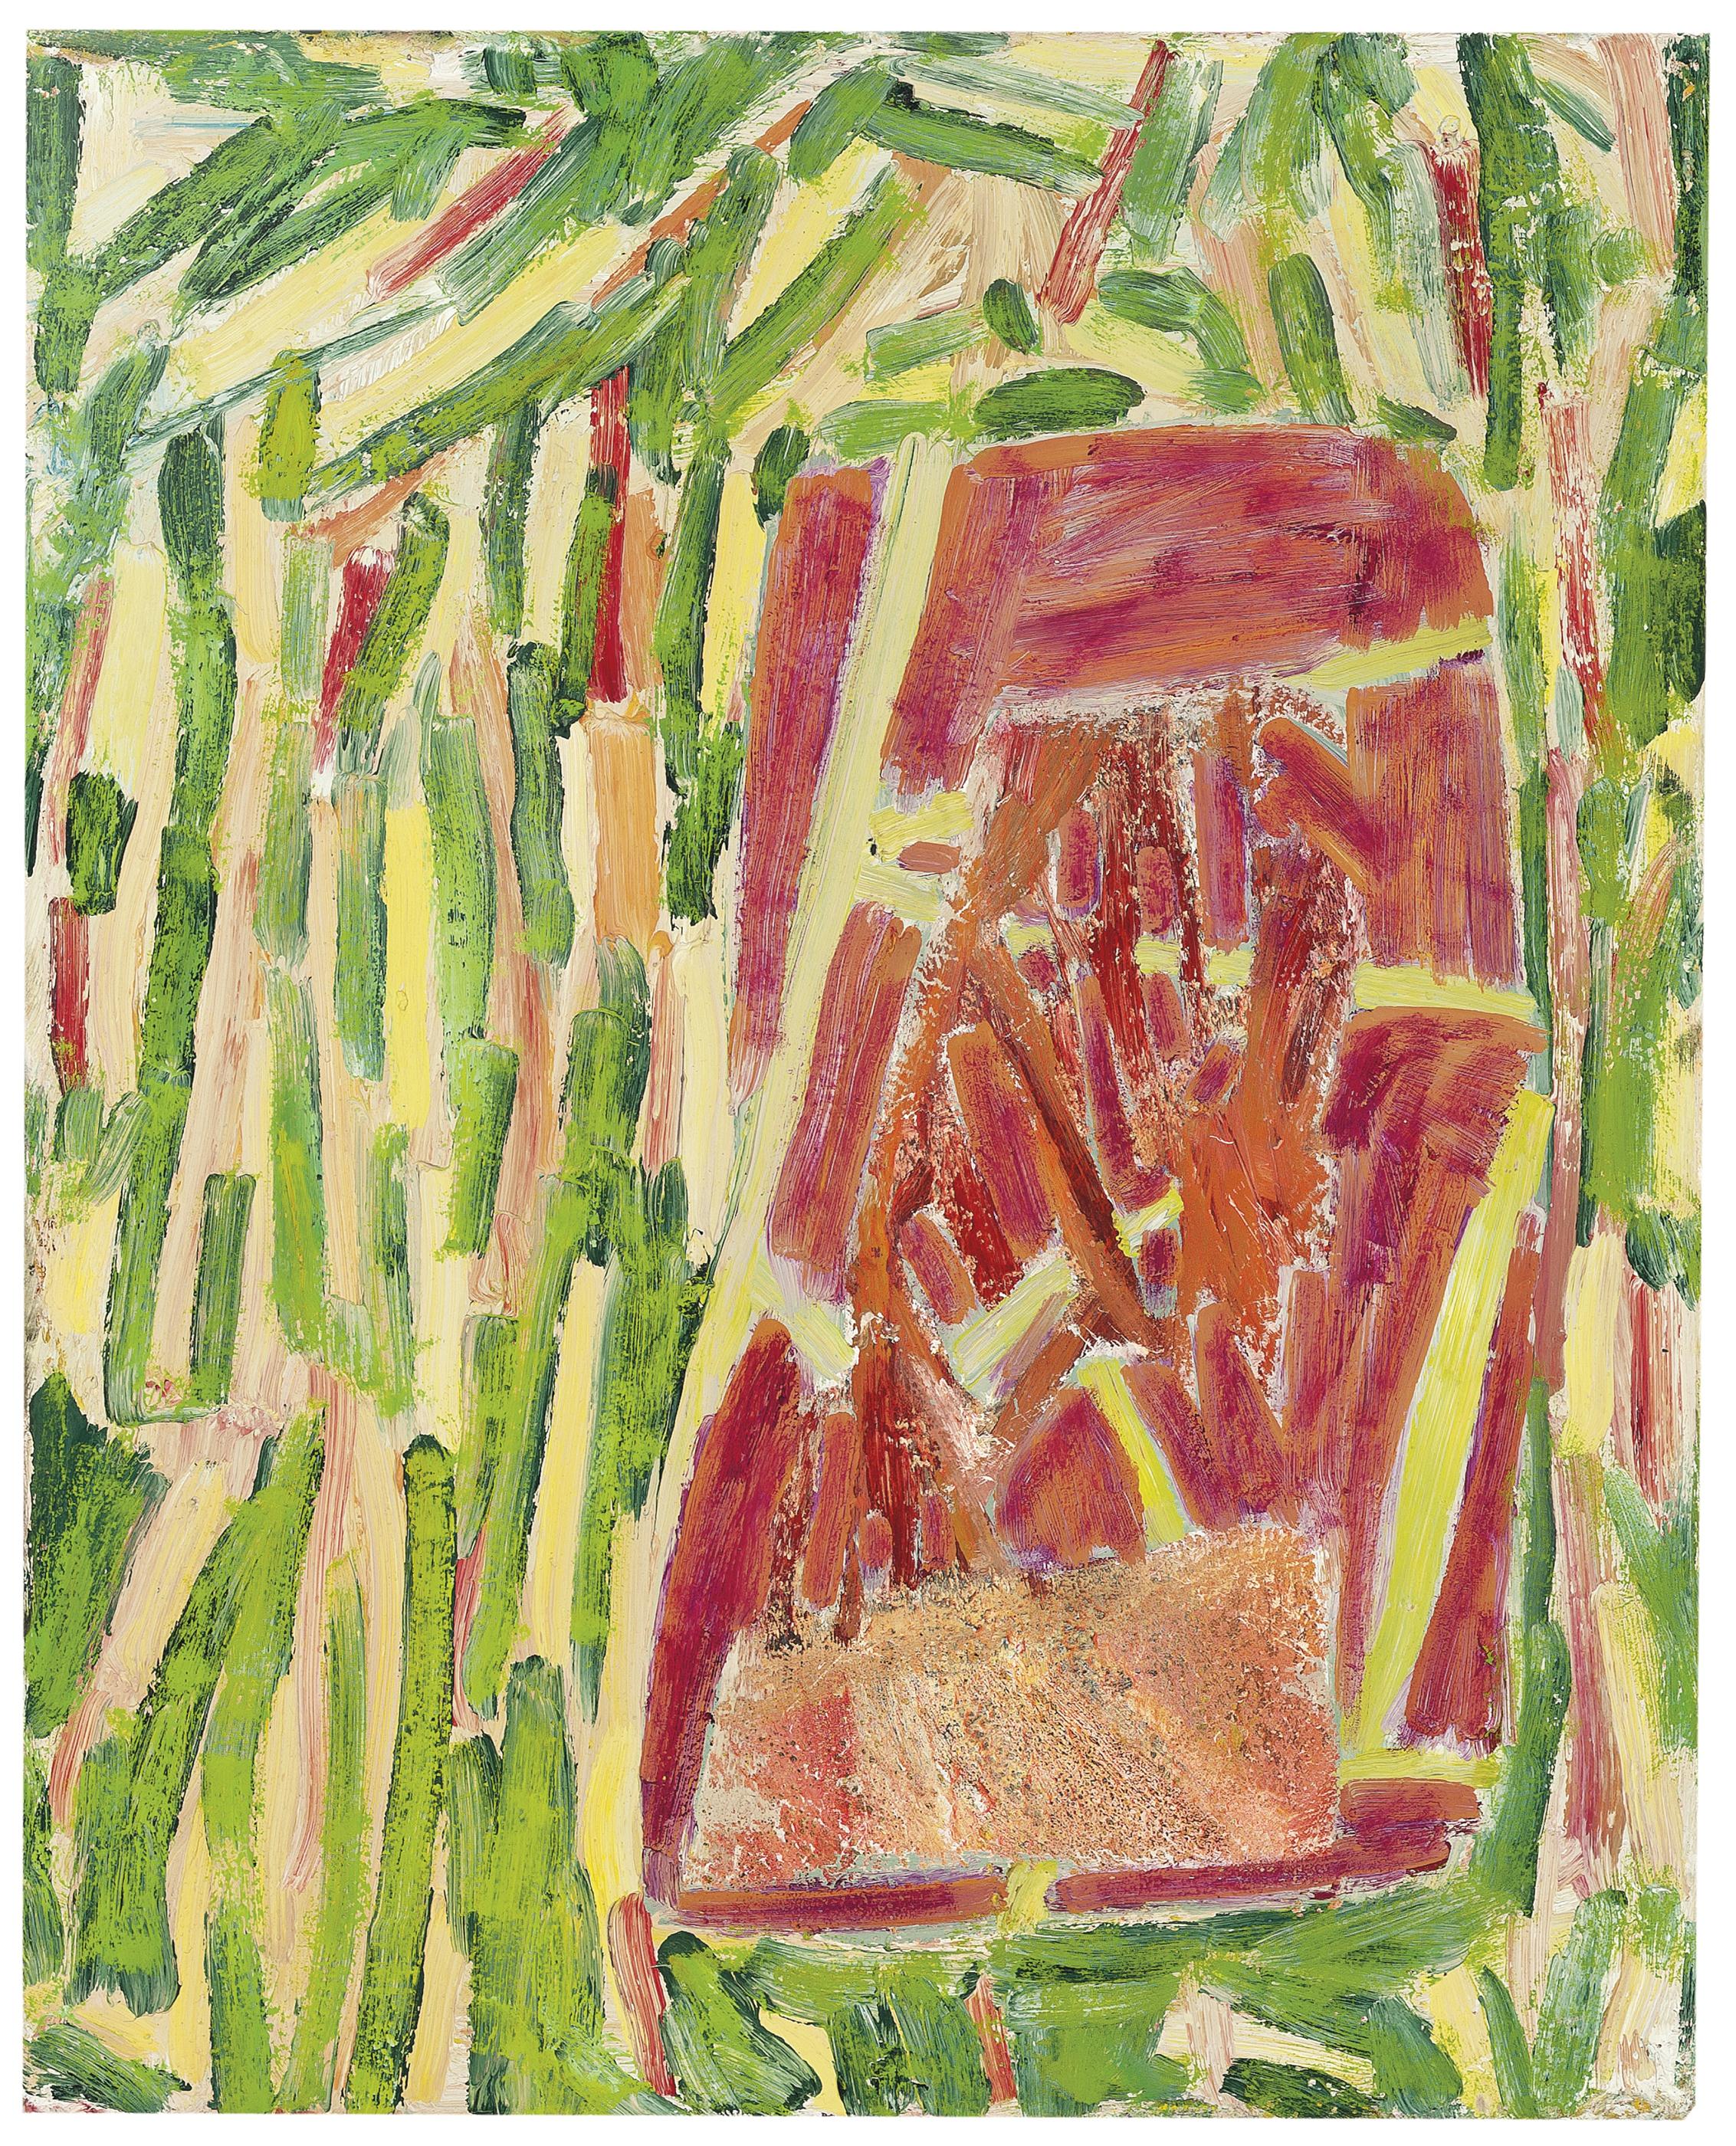 Gabriel Hartley, Carving, 2009, oil on canvas, 30 x 24 in.